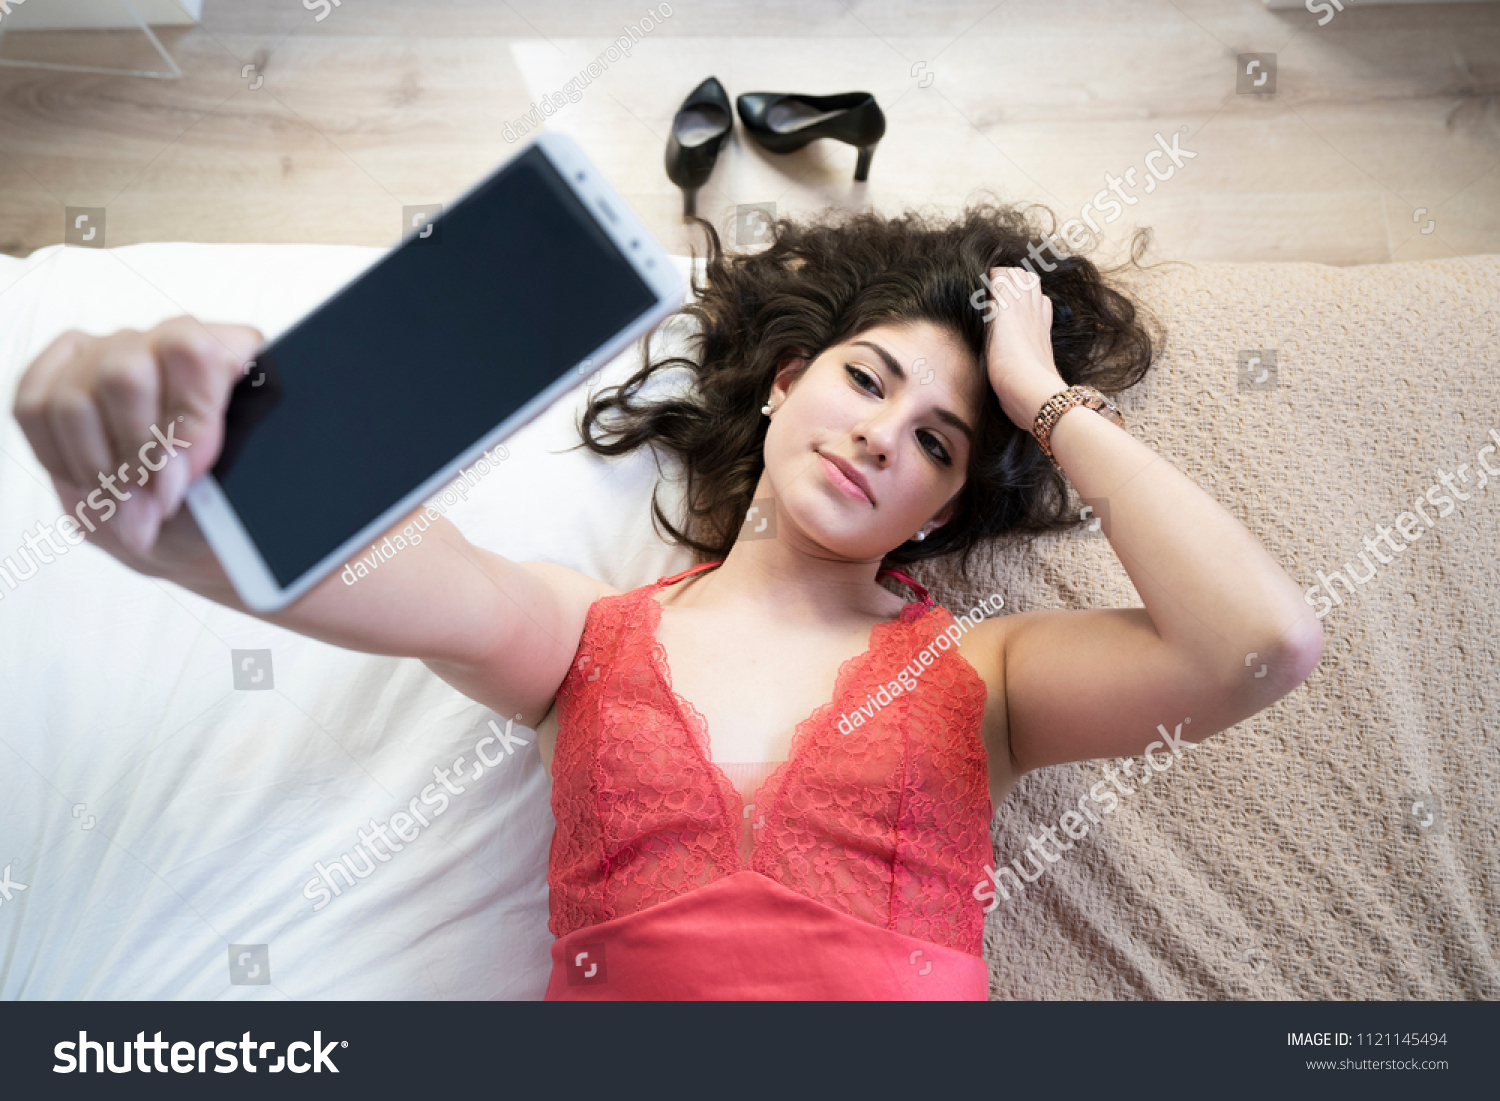 girl doing a sexy self portrait sex photo